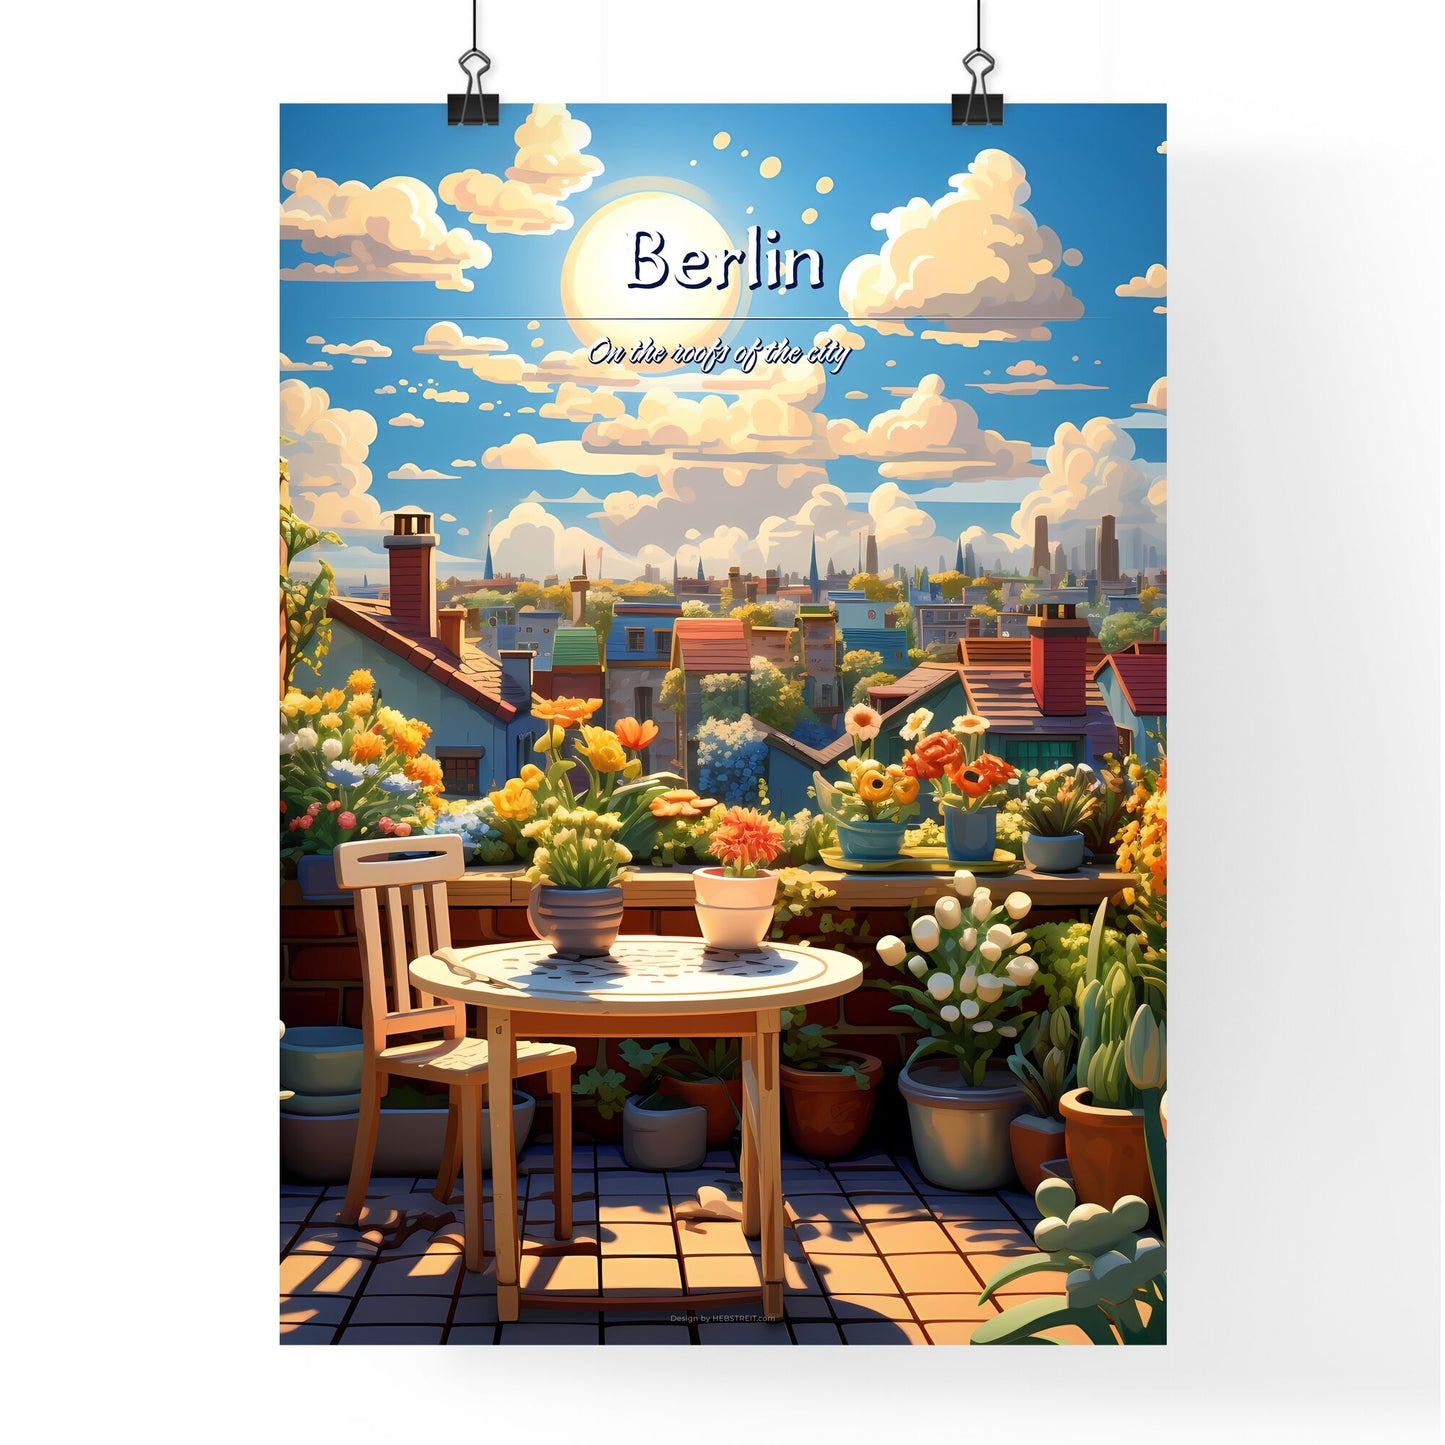 On the roofs of Berlin - Art print of a woman in a red dress Default Title